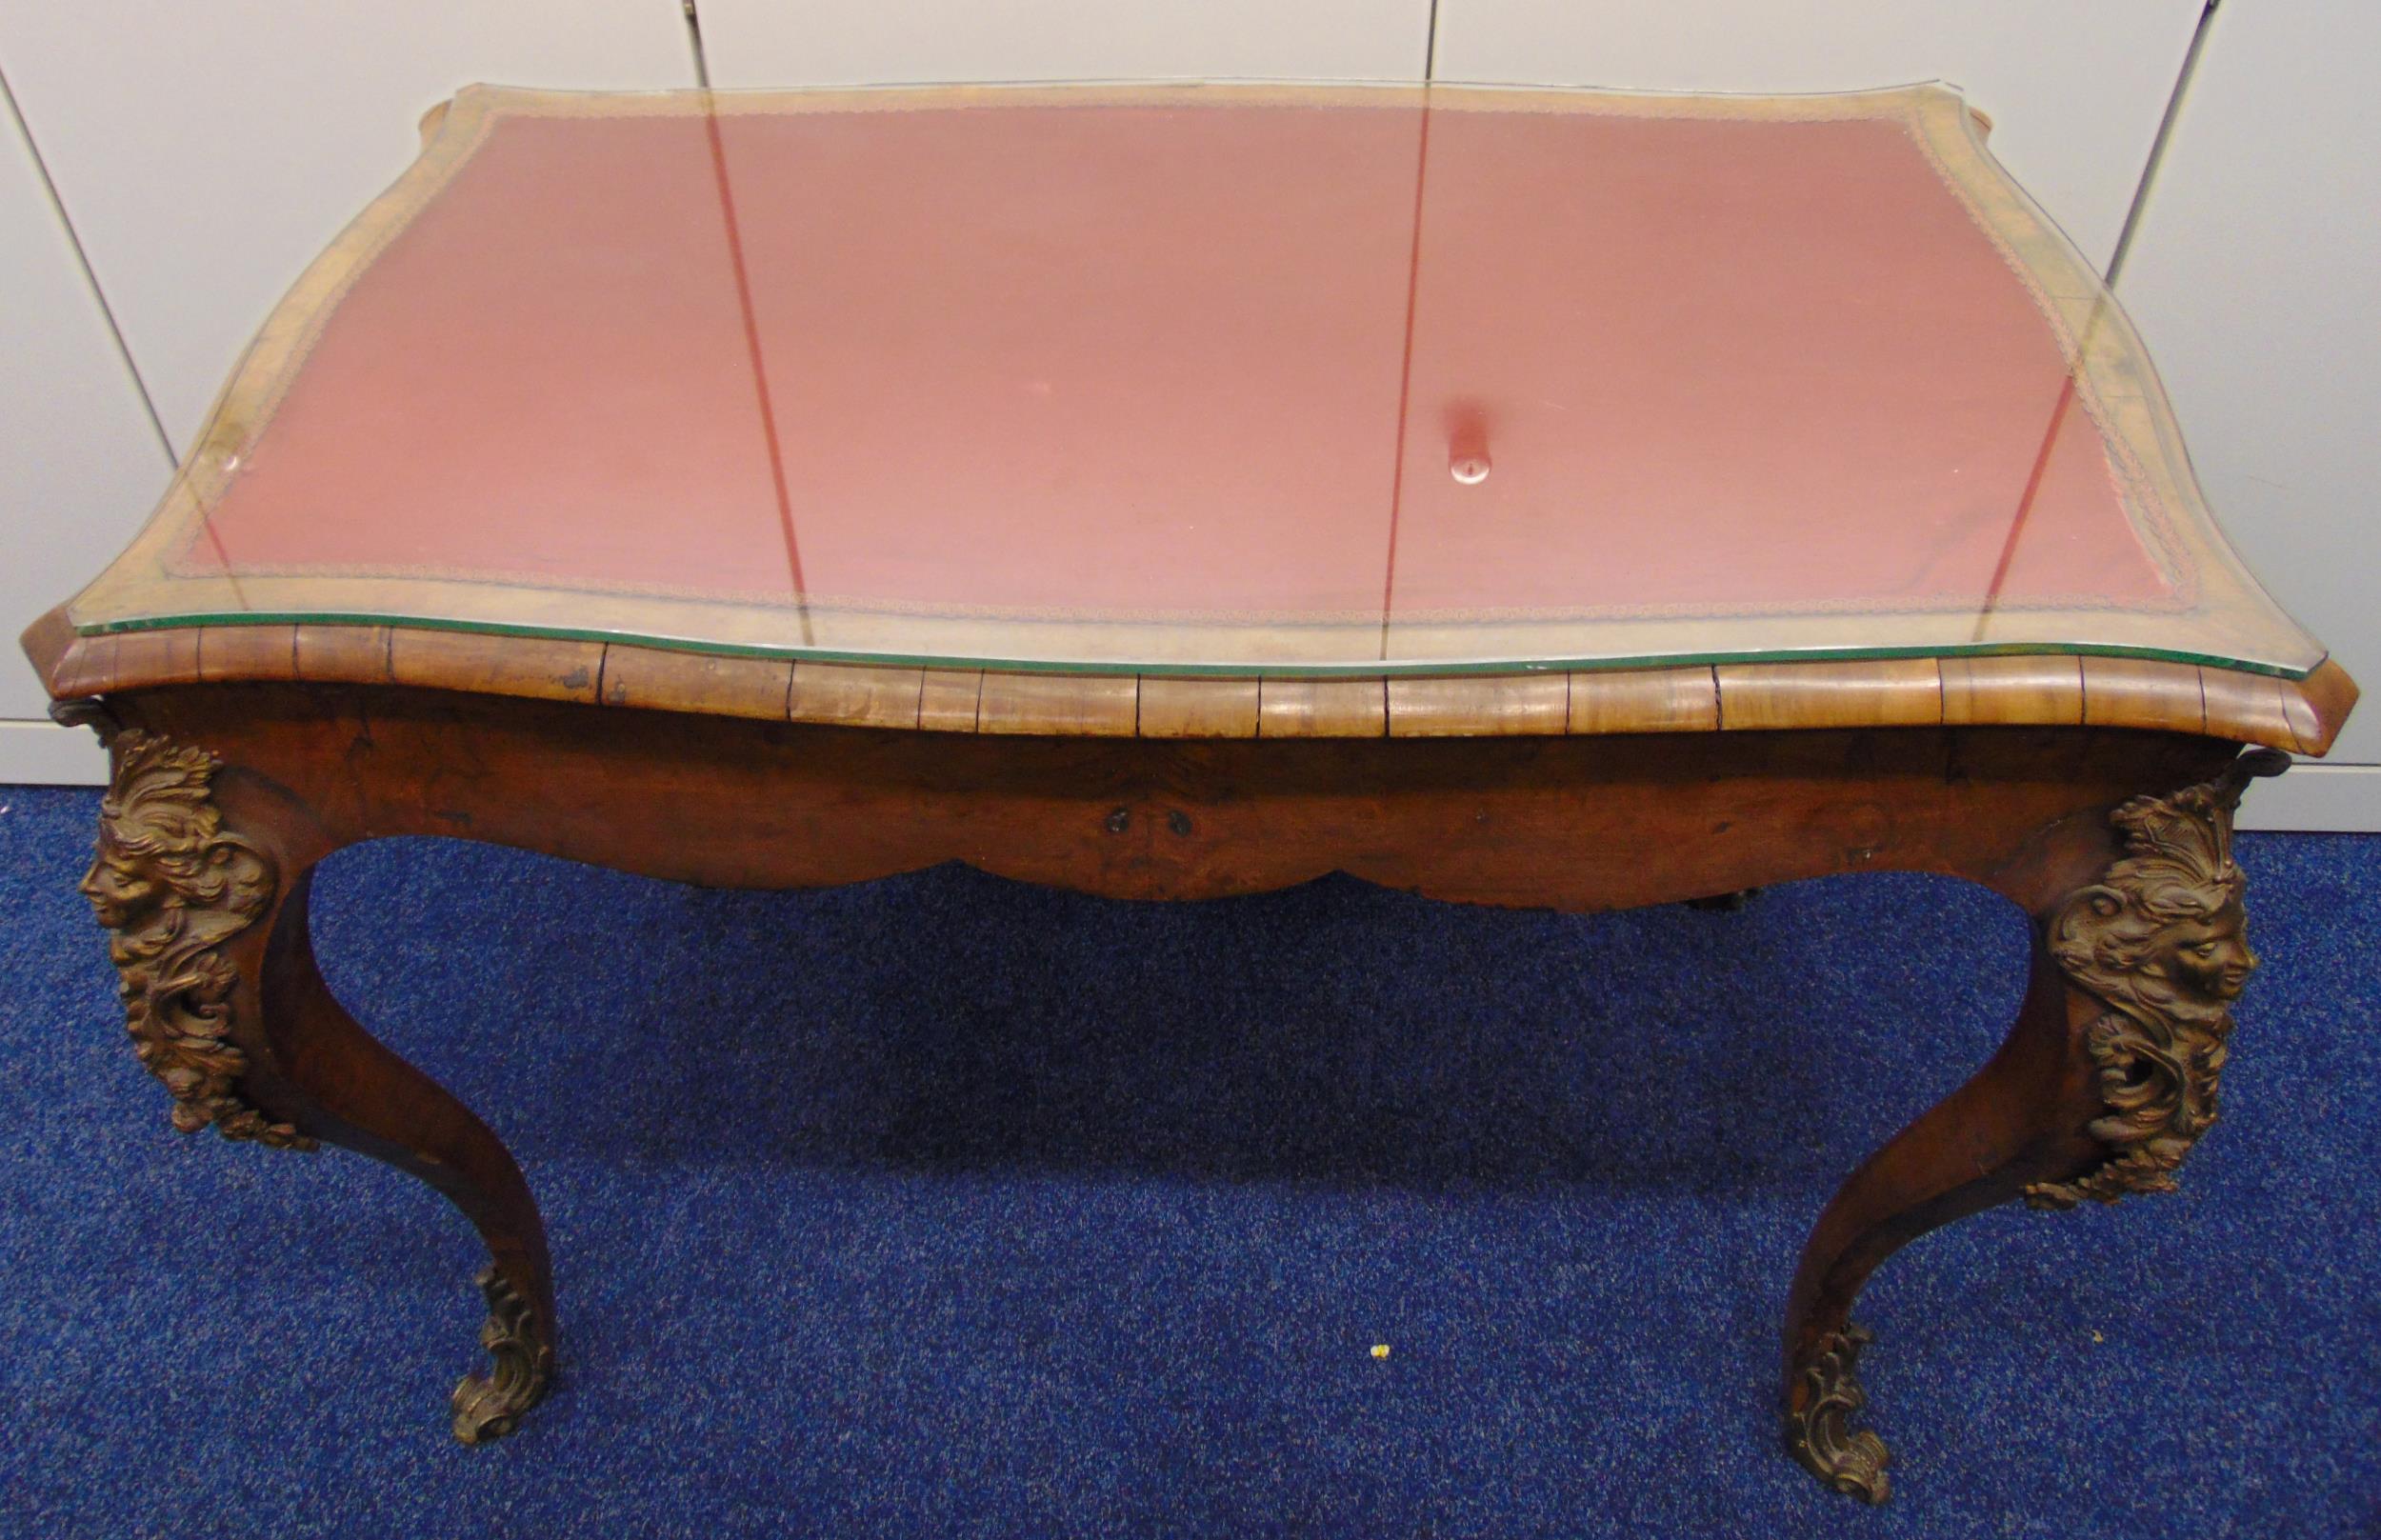 A French 19th century rectangular mahogany hall table with inset fabric and glass top on cabriole - Image 2 of 2